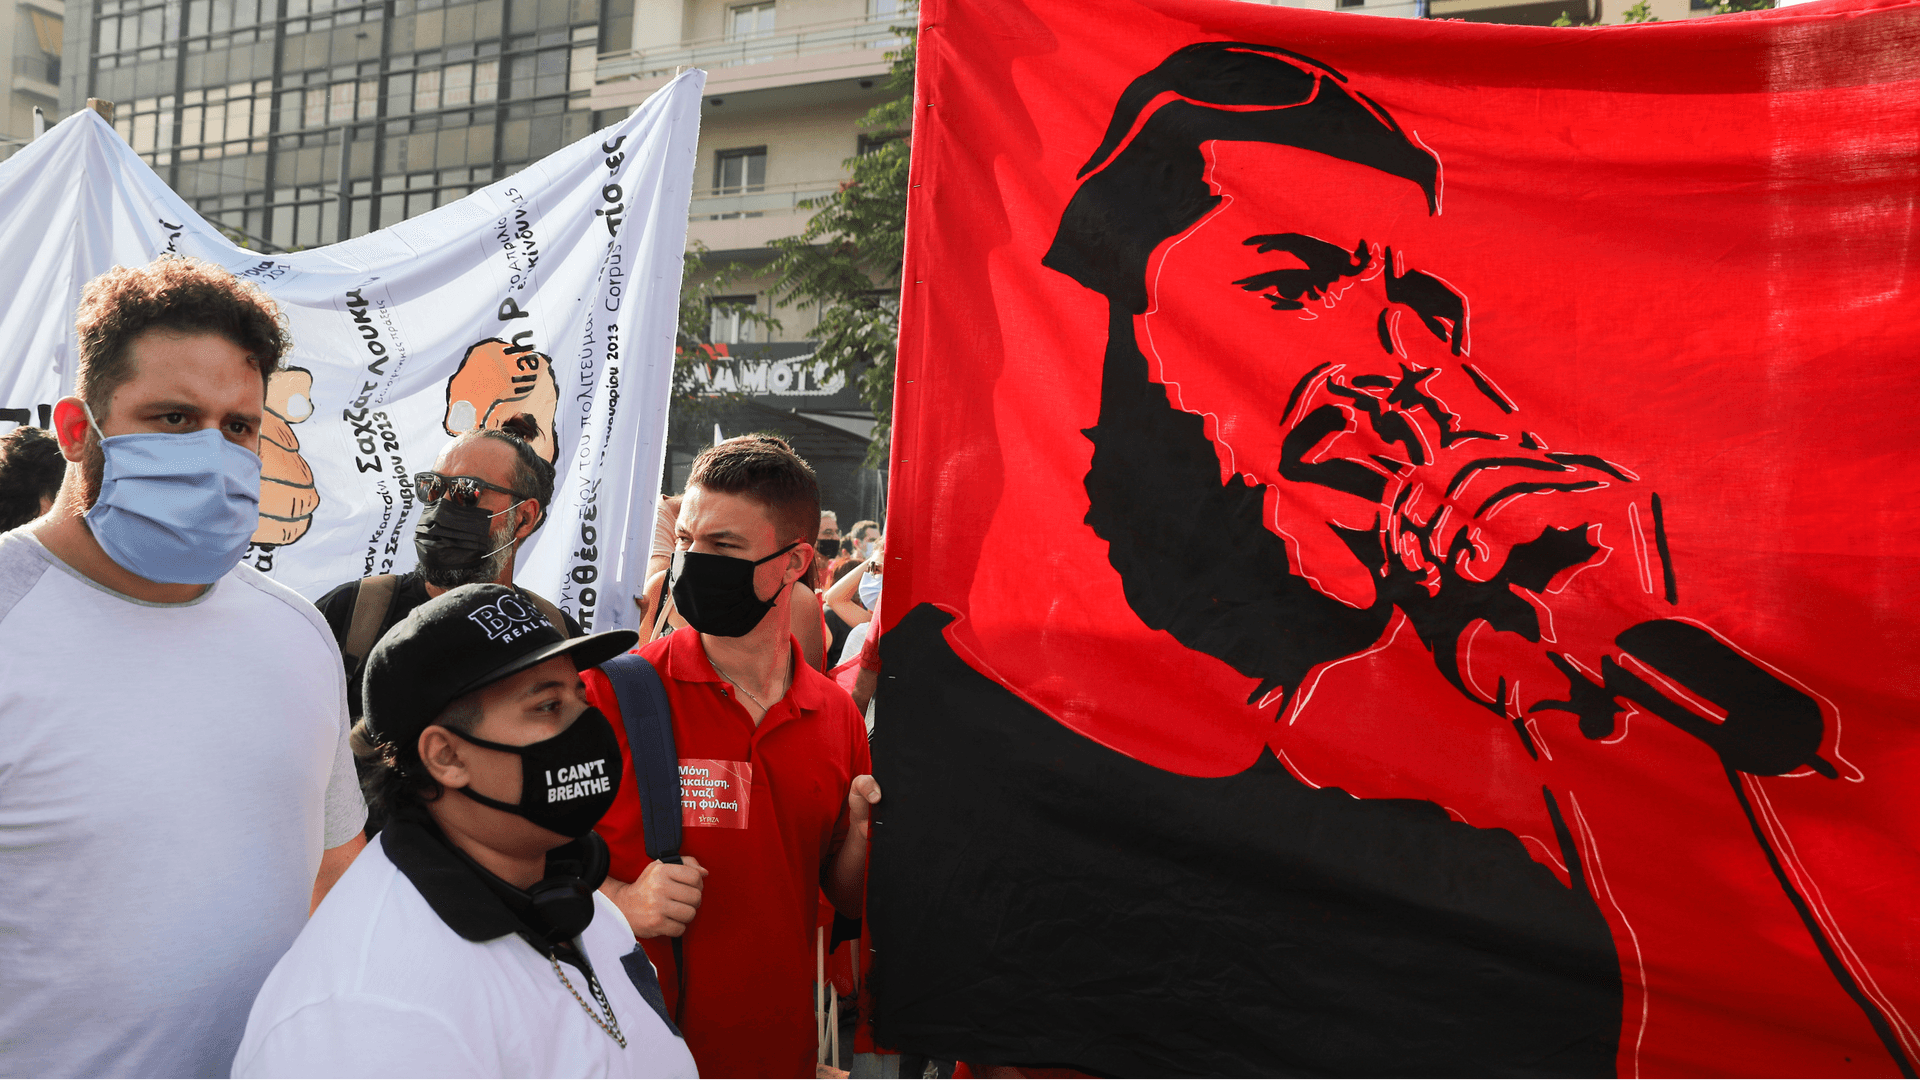 A bright red banner depicting anti-racist Greek rapper Pavlos Fyssas is seen, as demonstrators protest at the close of the trial for leaders and members of the far-right Golden Dawn, in Athens, Greece, Oct. 7, 2020.